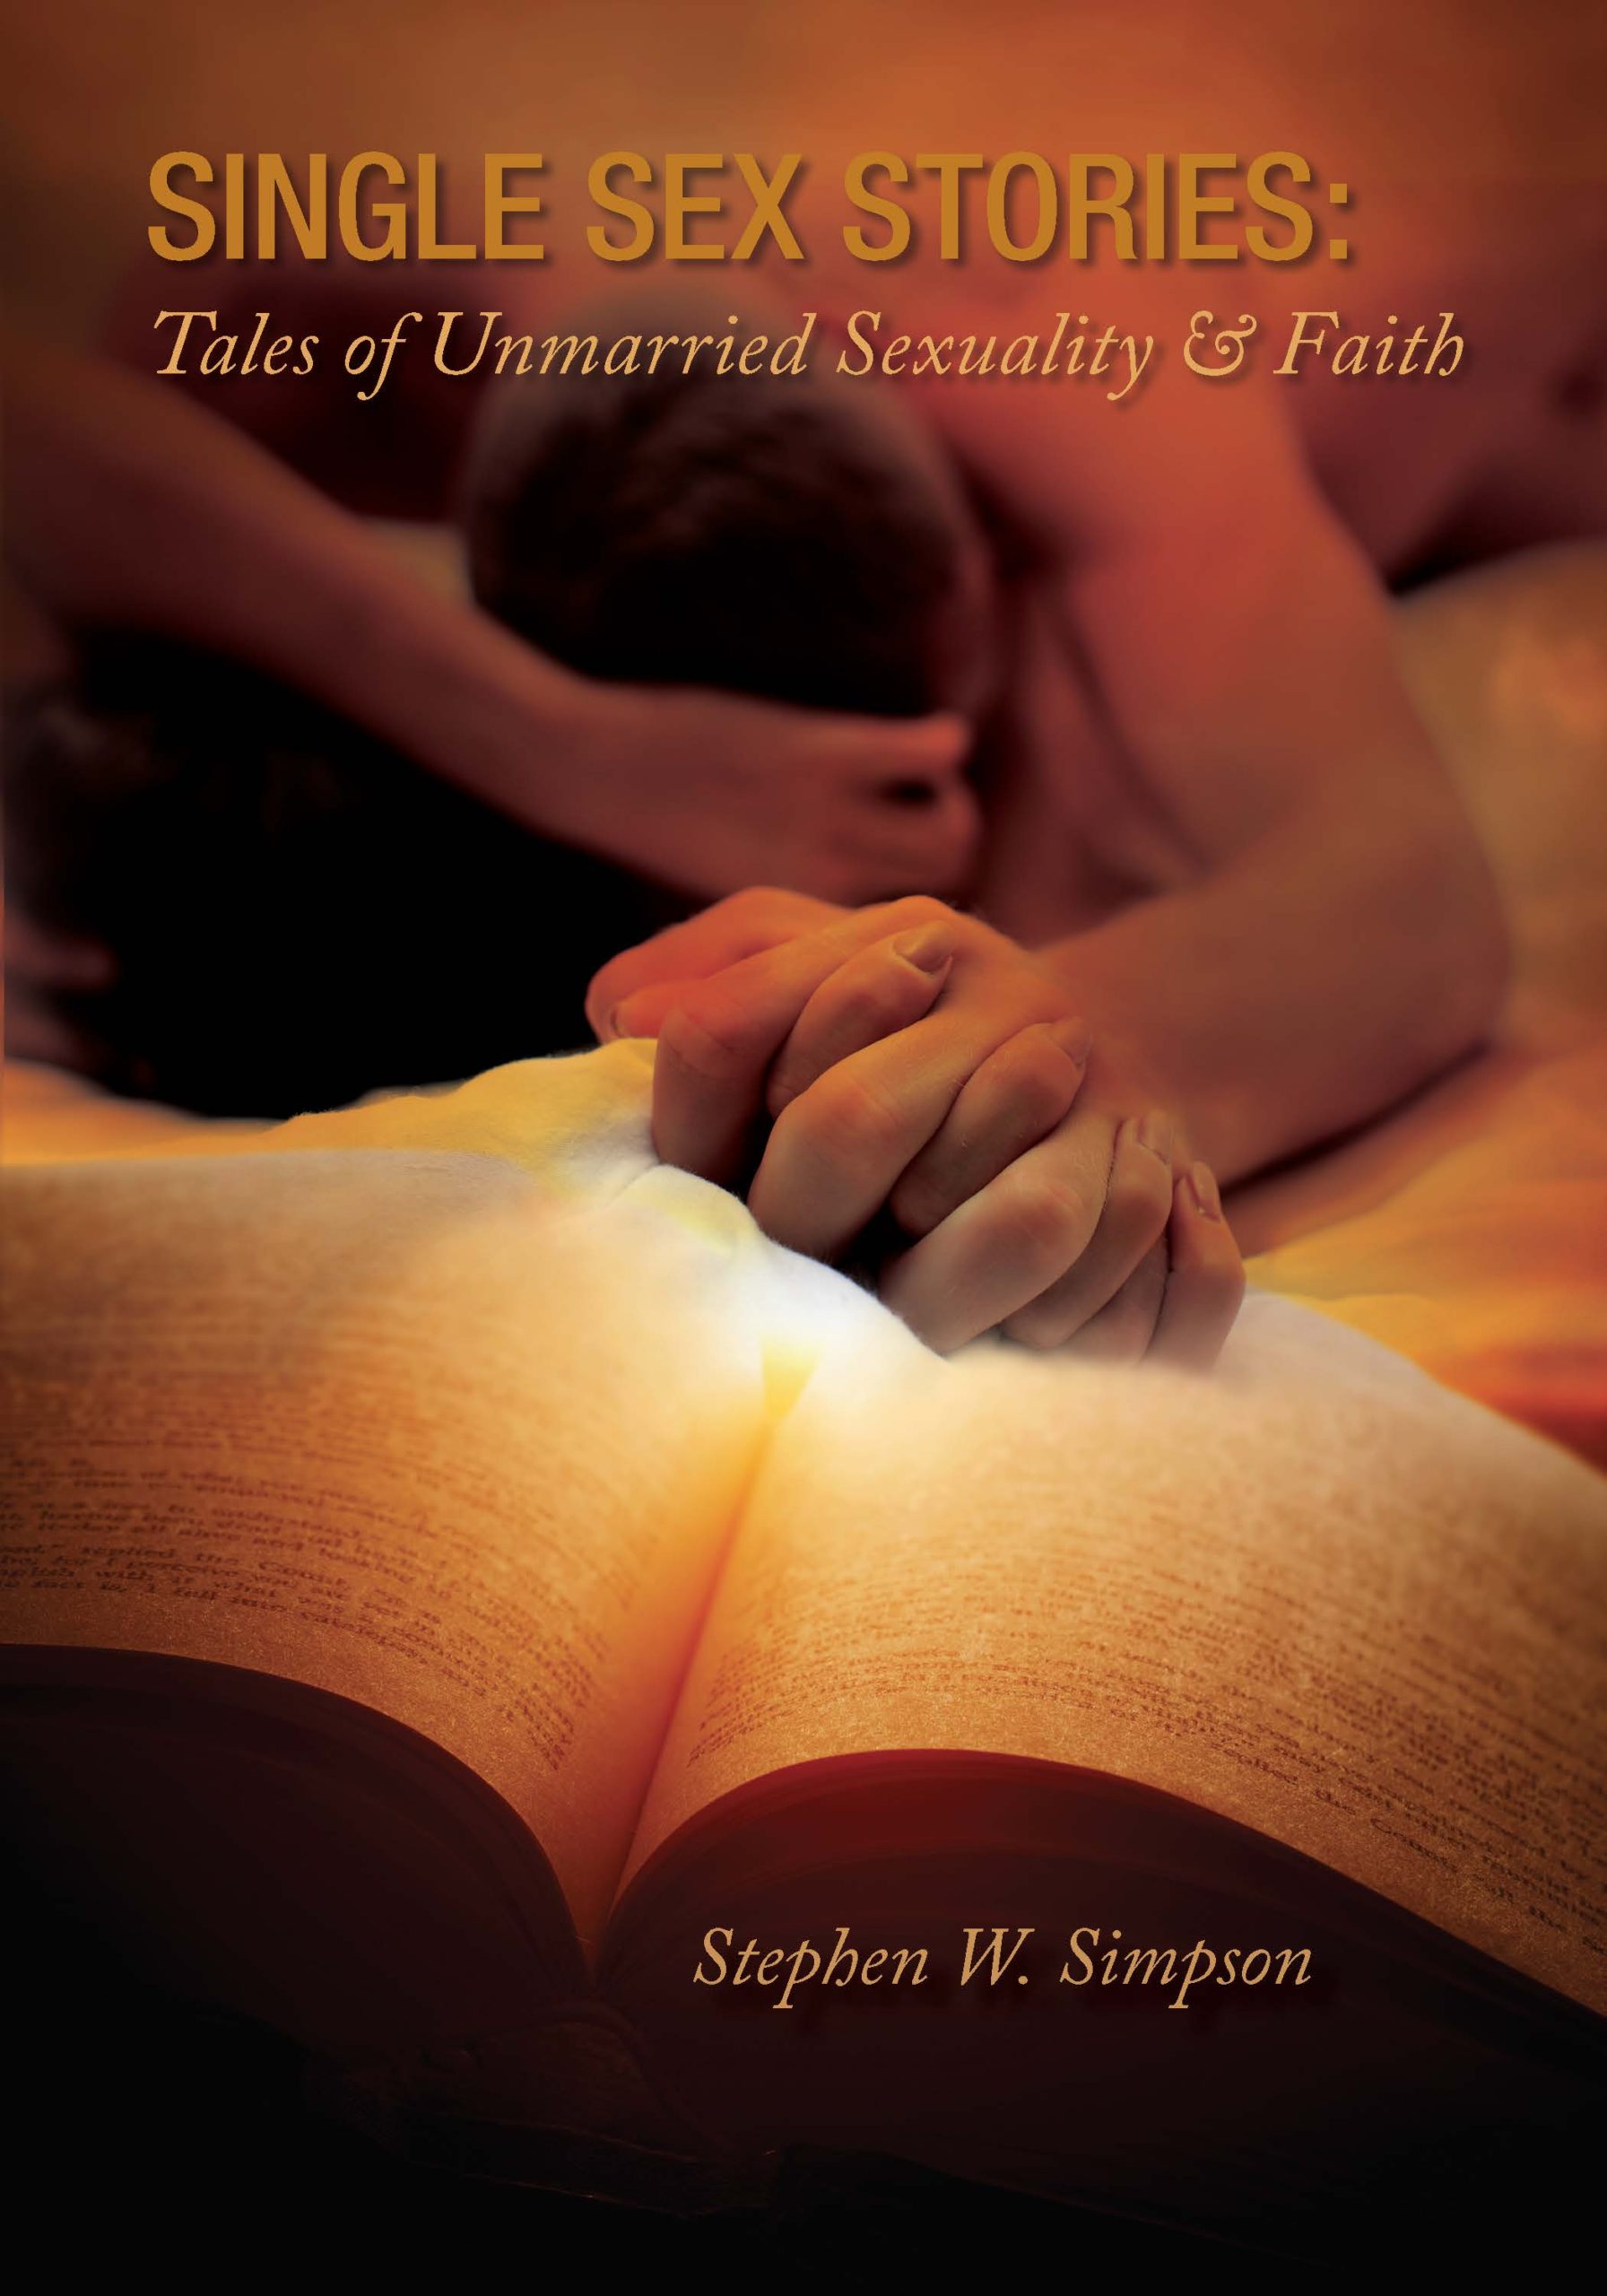 Single Sex Stories Tales of Unmarried Sexuality and Faith image